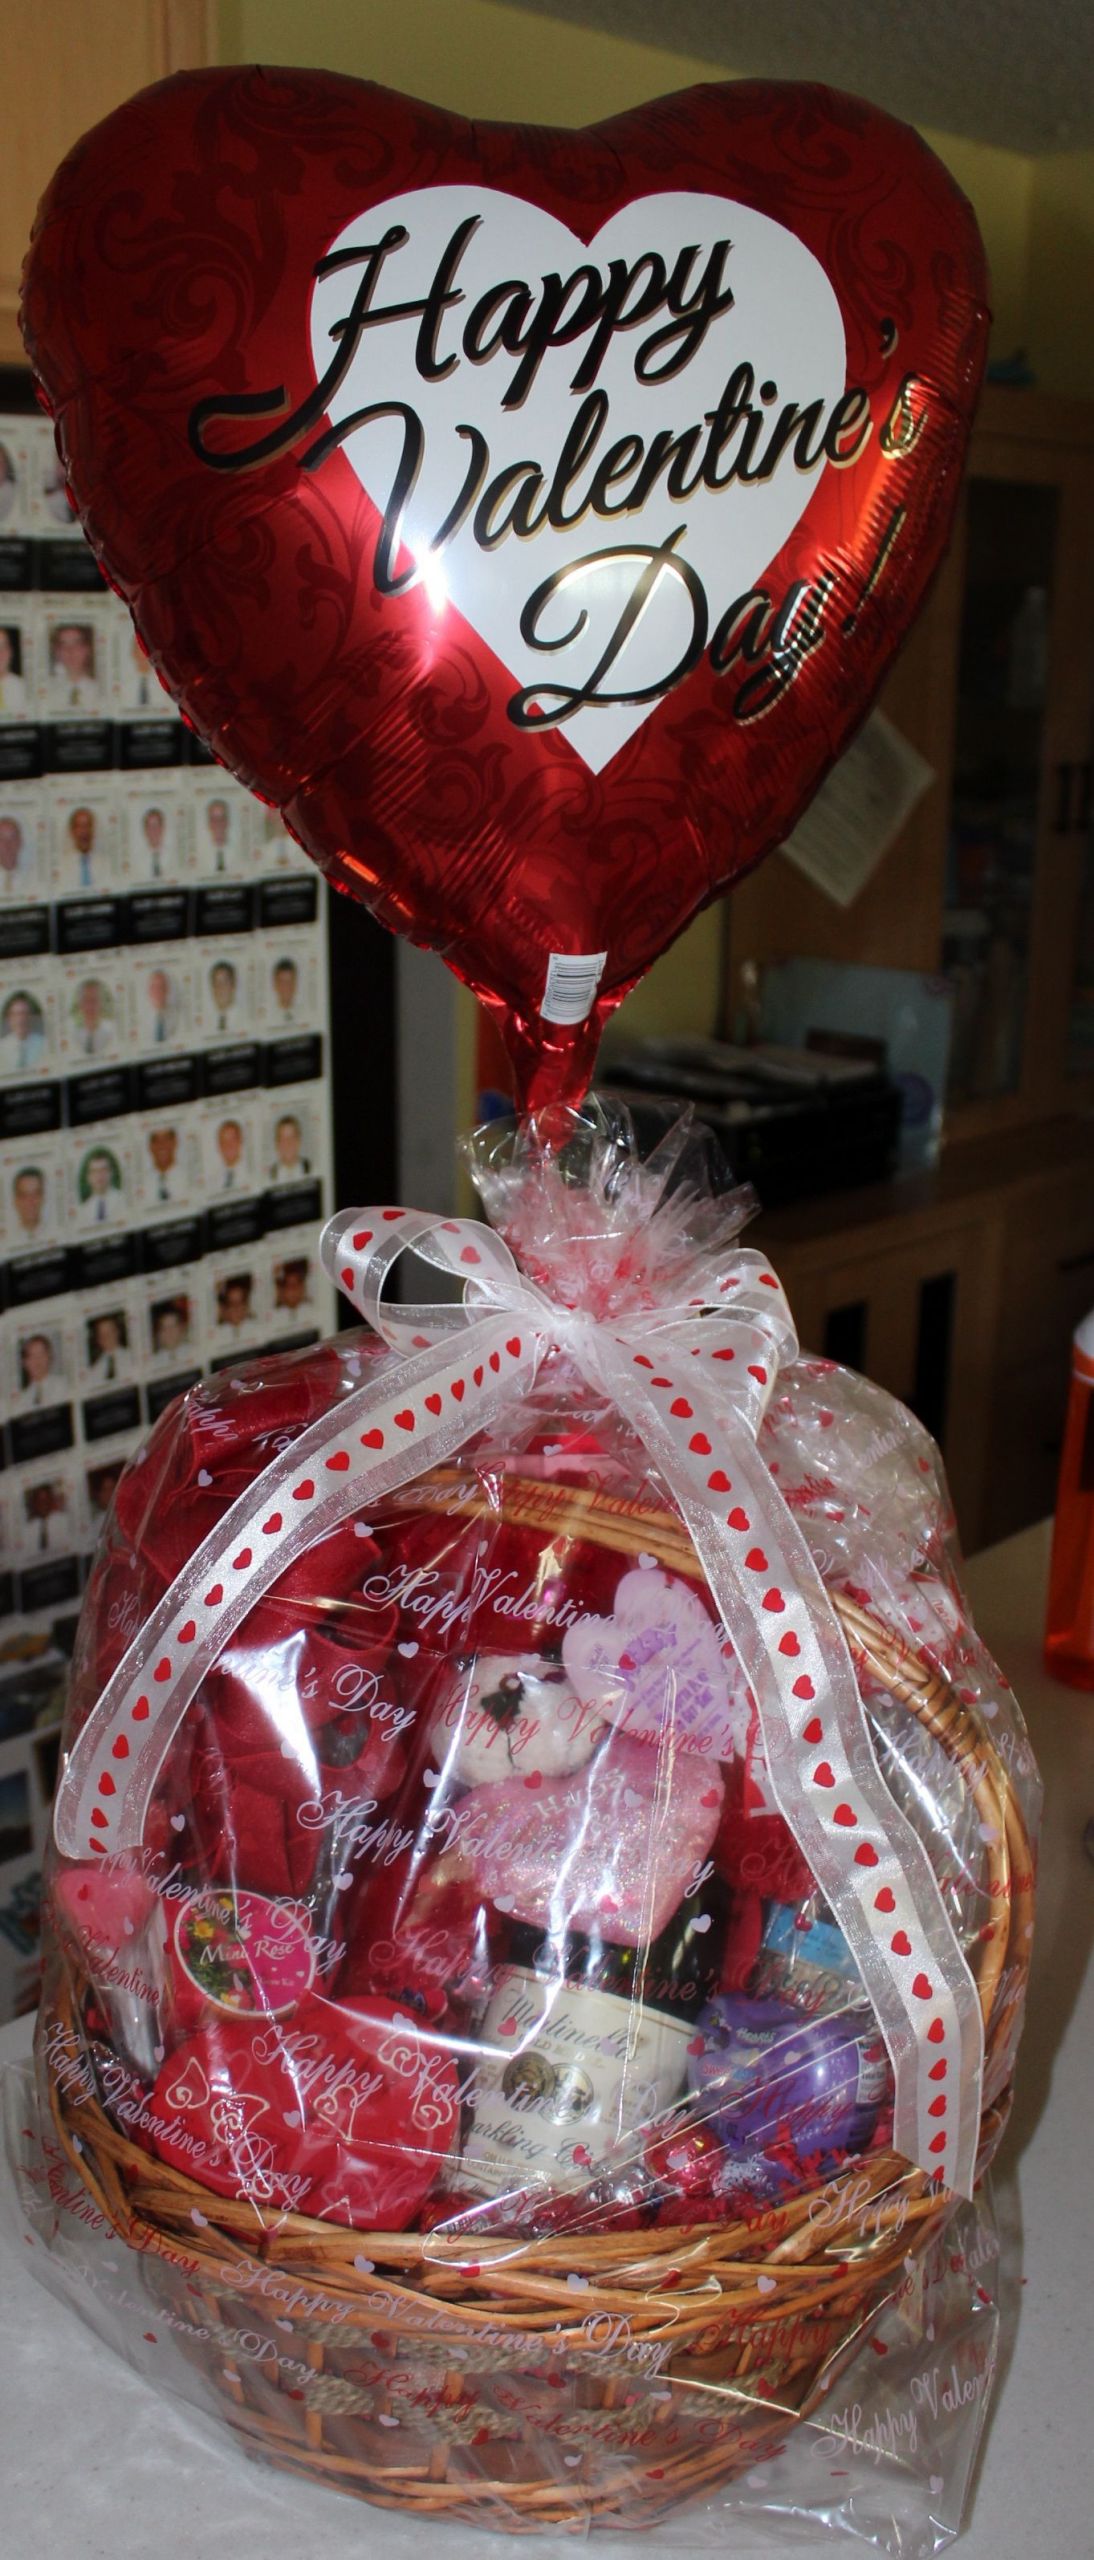 Valentine Gift For Her Ideas
 47 How To Make A Valentine Gift Basket For Her Best Idea